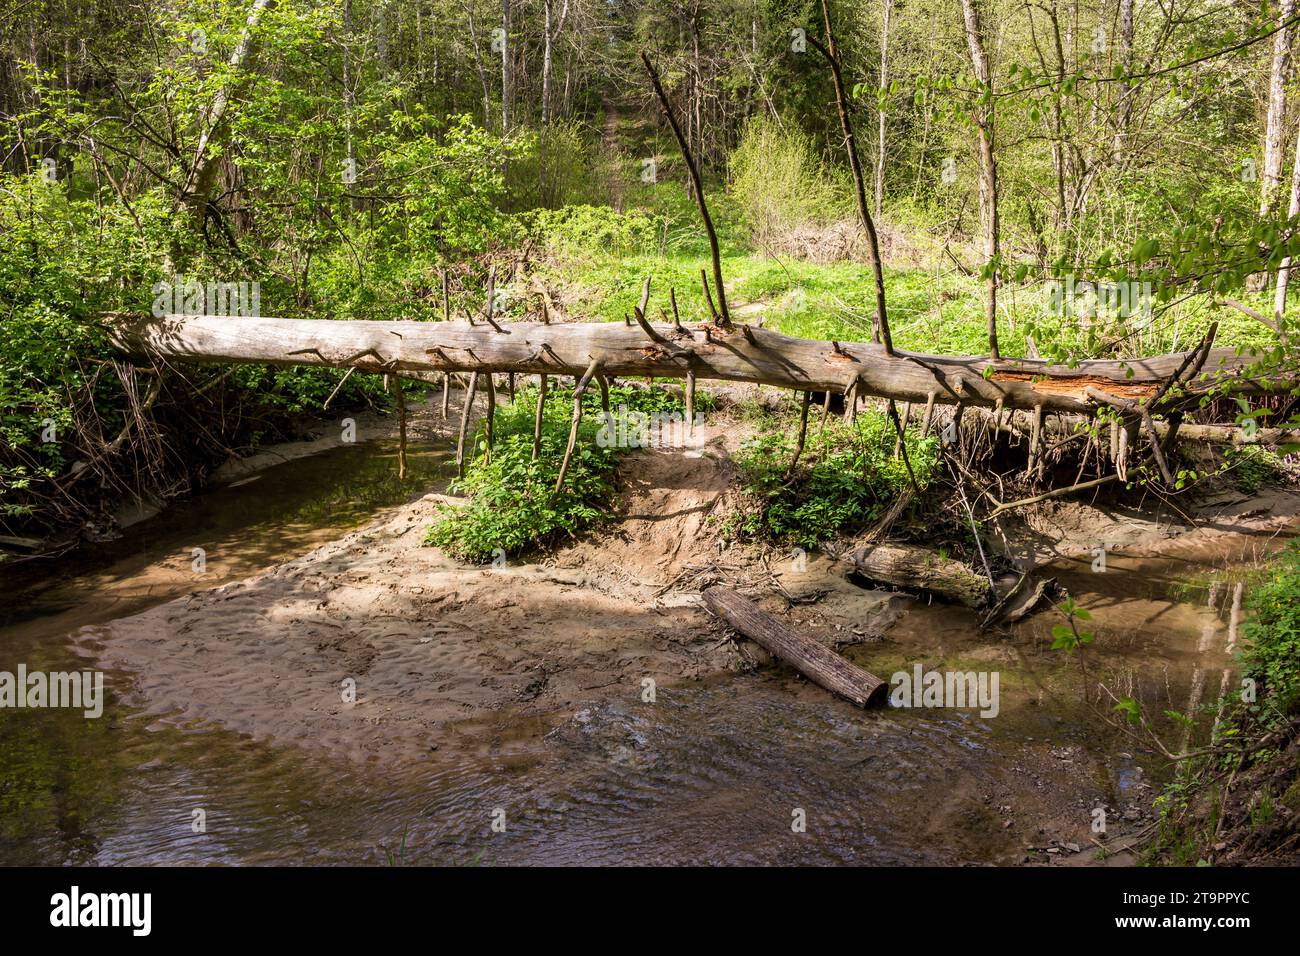 Fallen dry tree blocking a ford across a stream Stock Photo